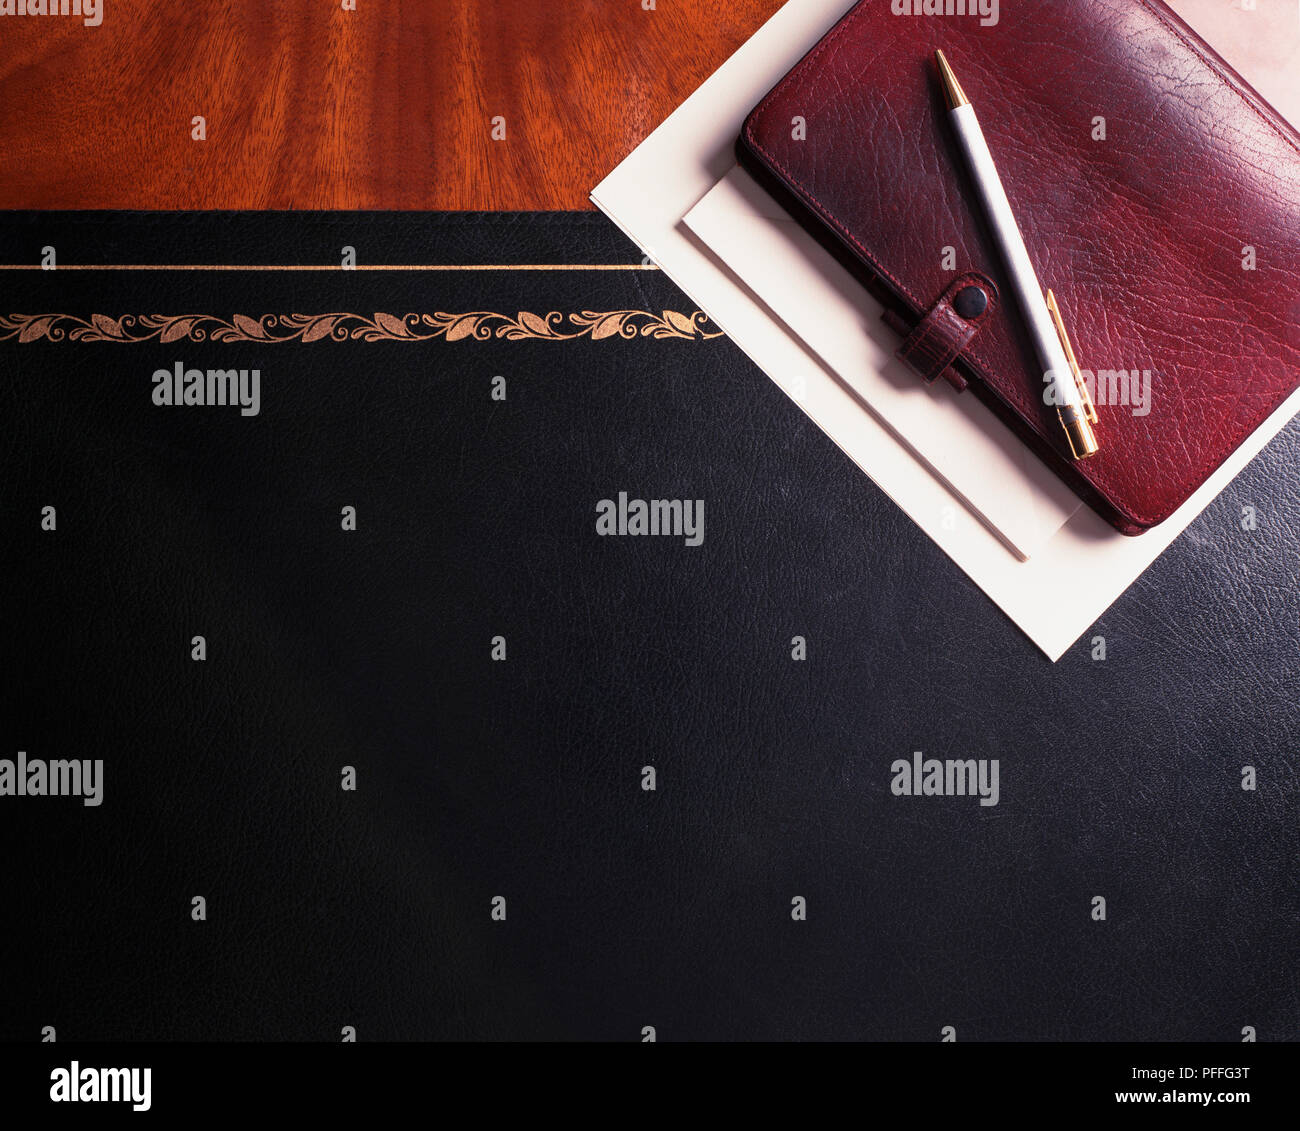 Wooden worksurface with a black leather insert and a personal organiser in the corner. Stock Photo